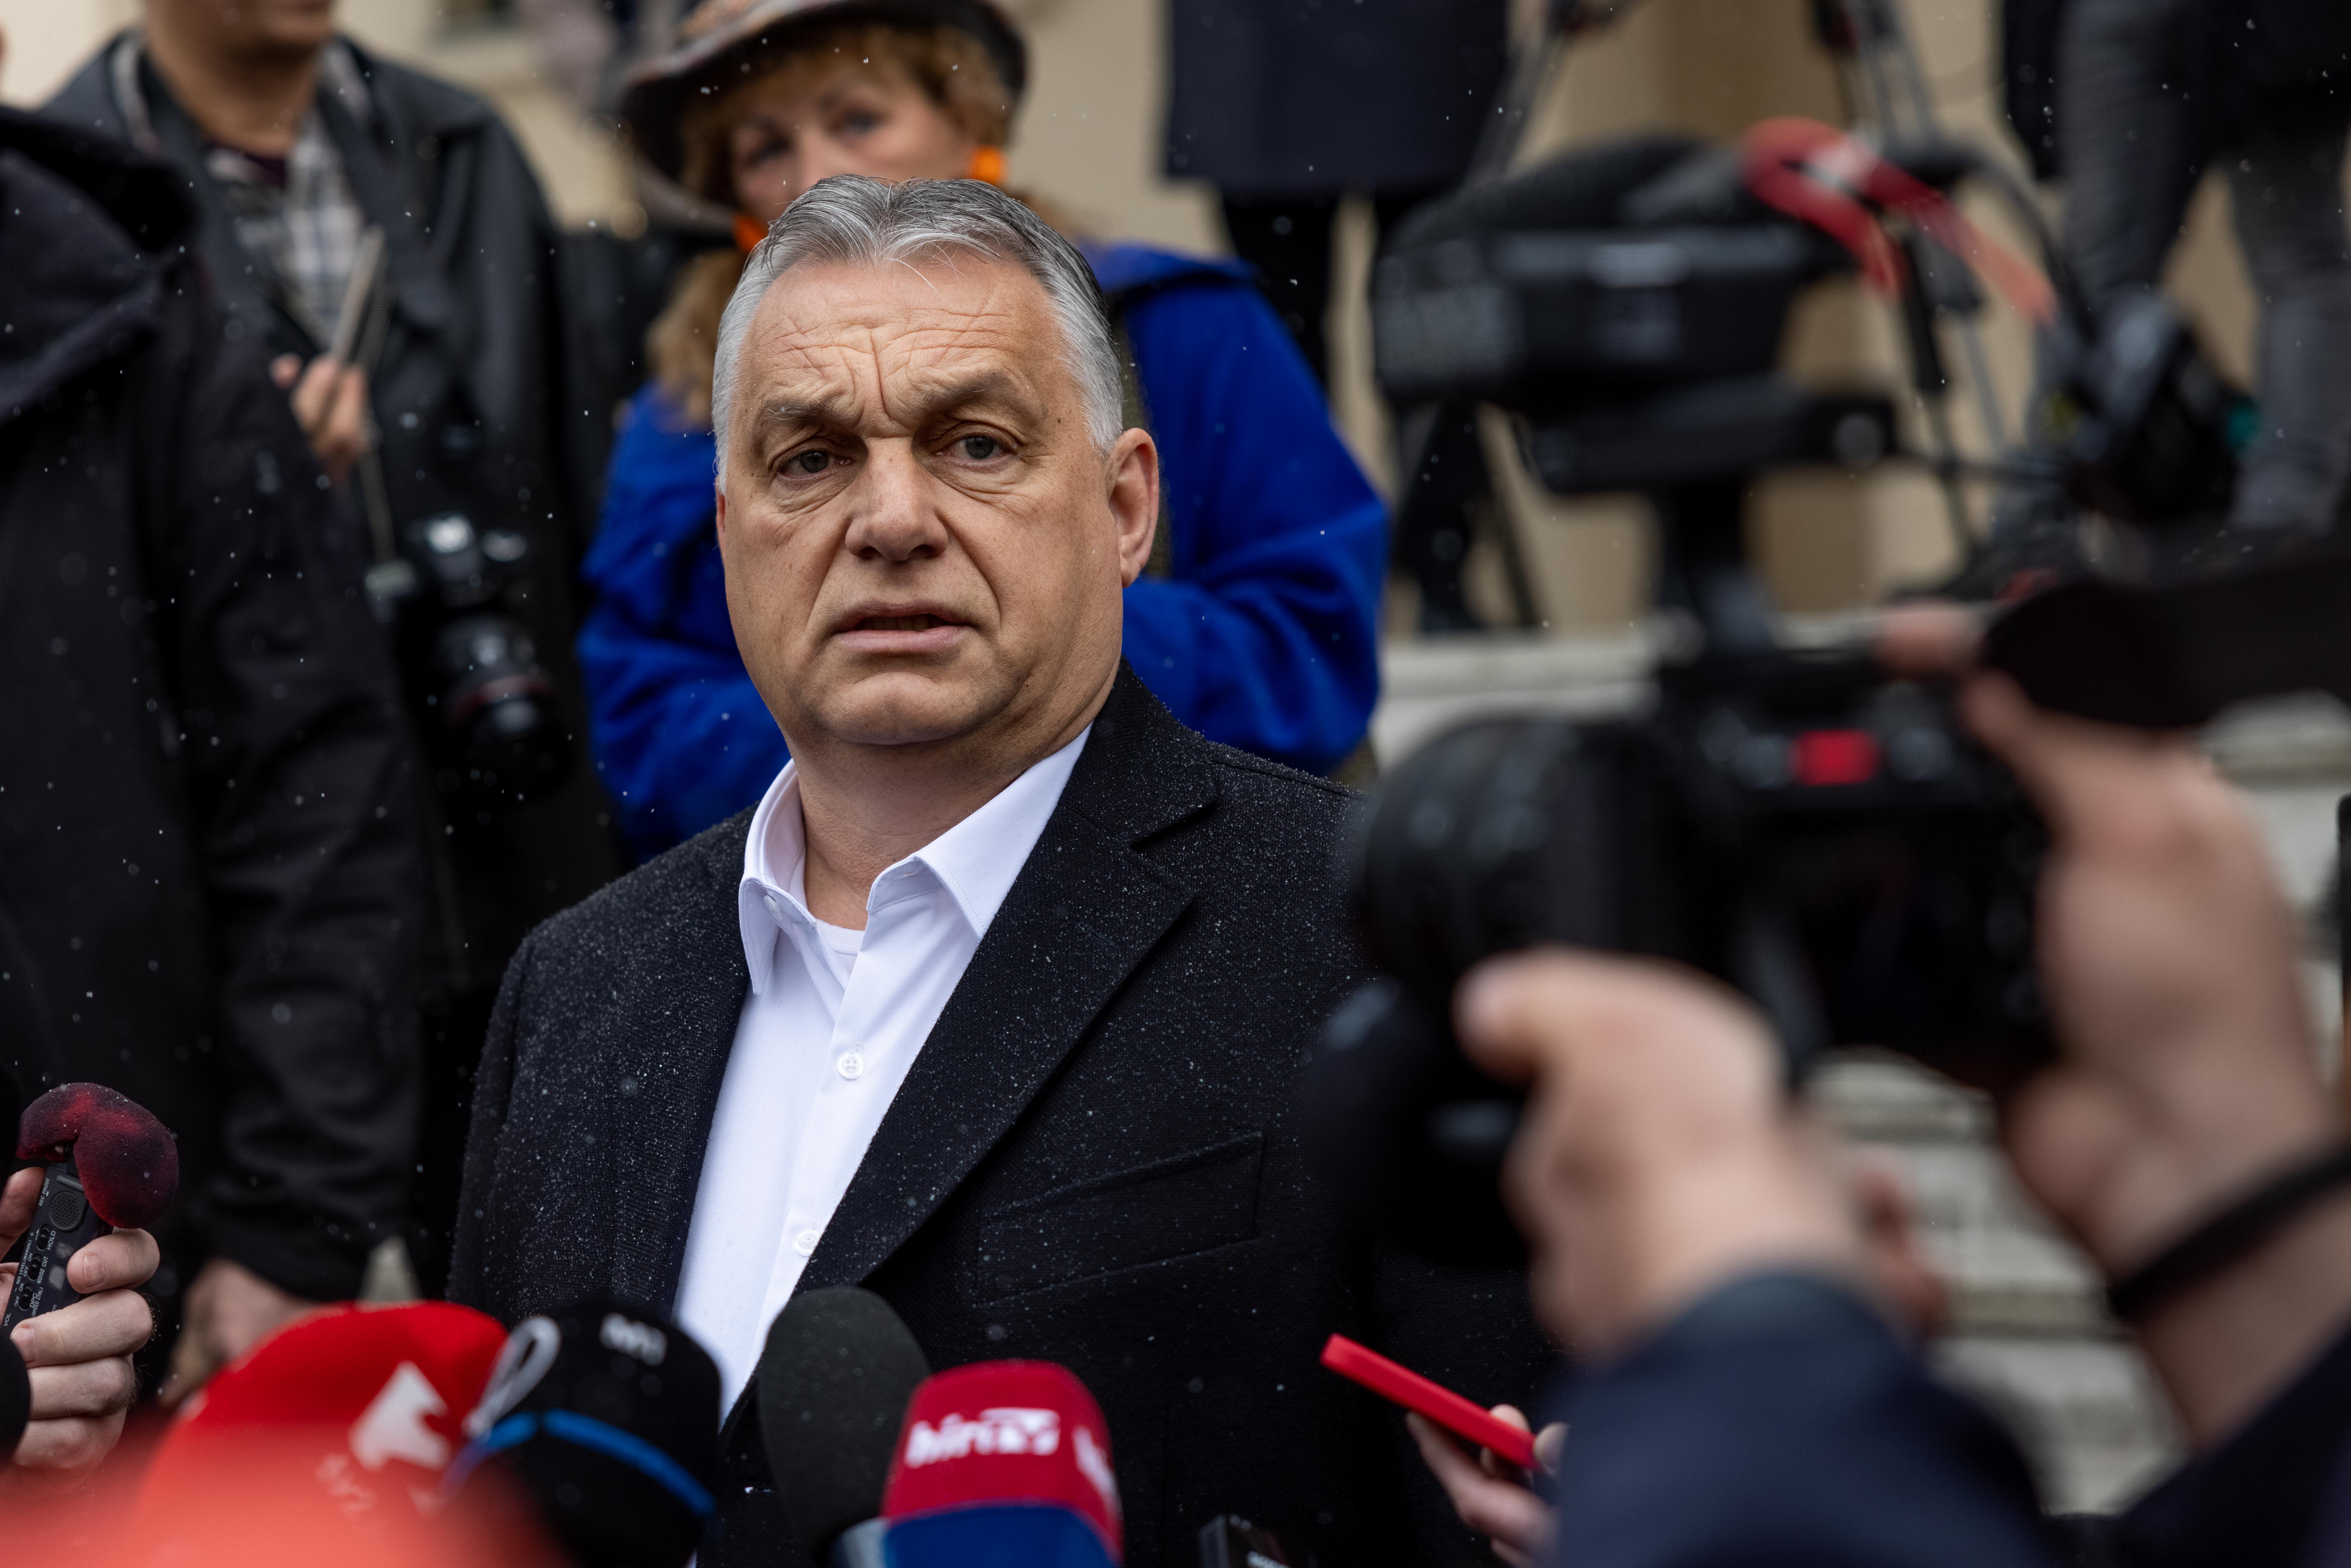 The Fidesz party, led by Orbán, advocates the traditional, Christian nuclear family